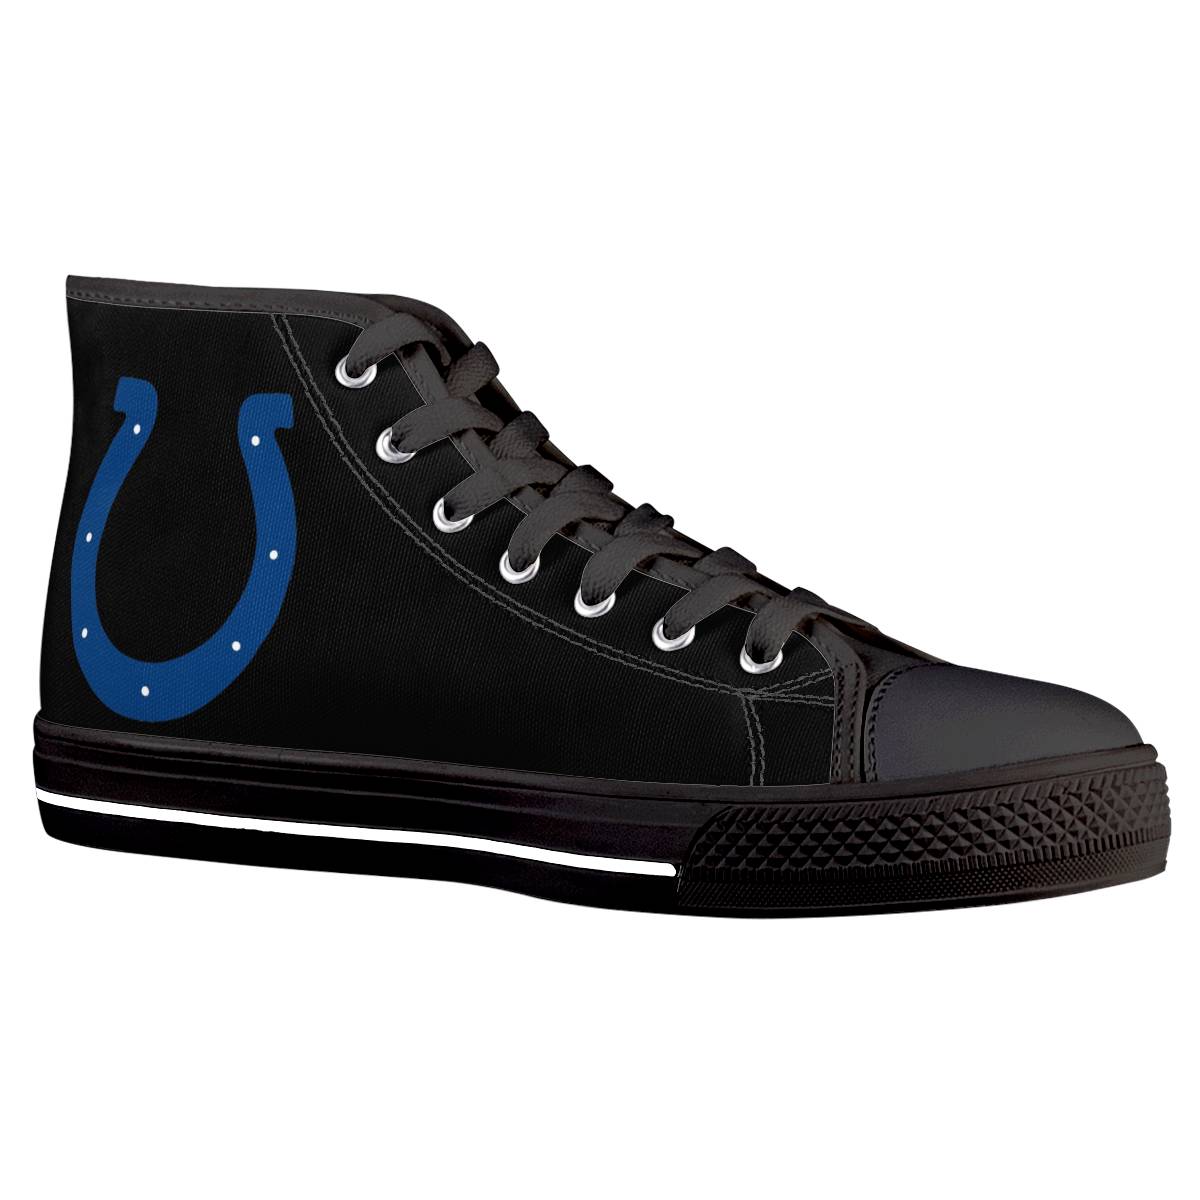 Women's Indianapolis Colts High Top Canvas Sneakers 002